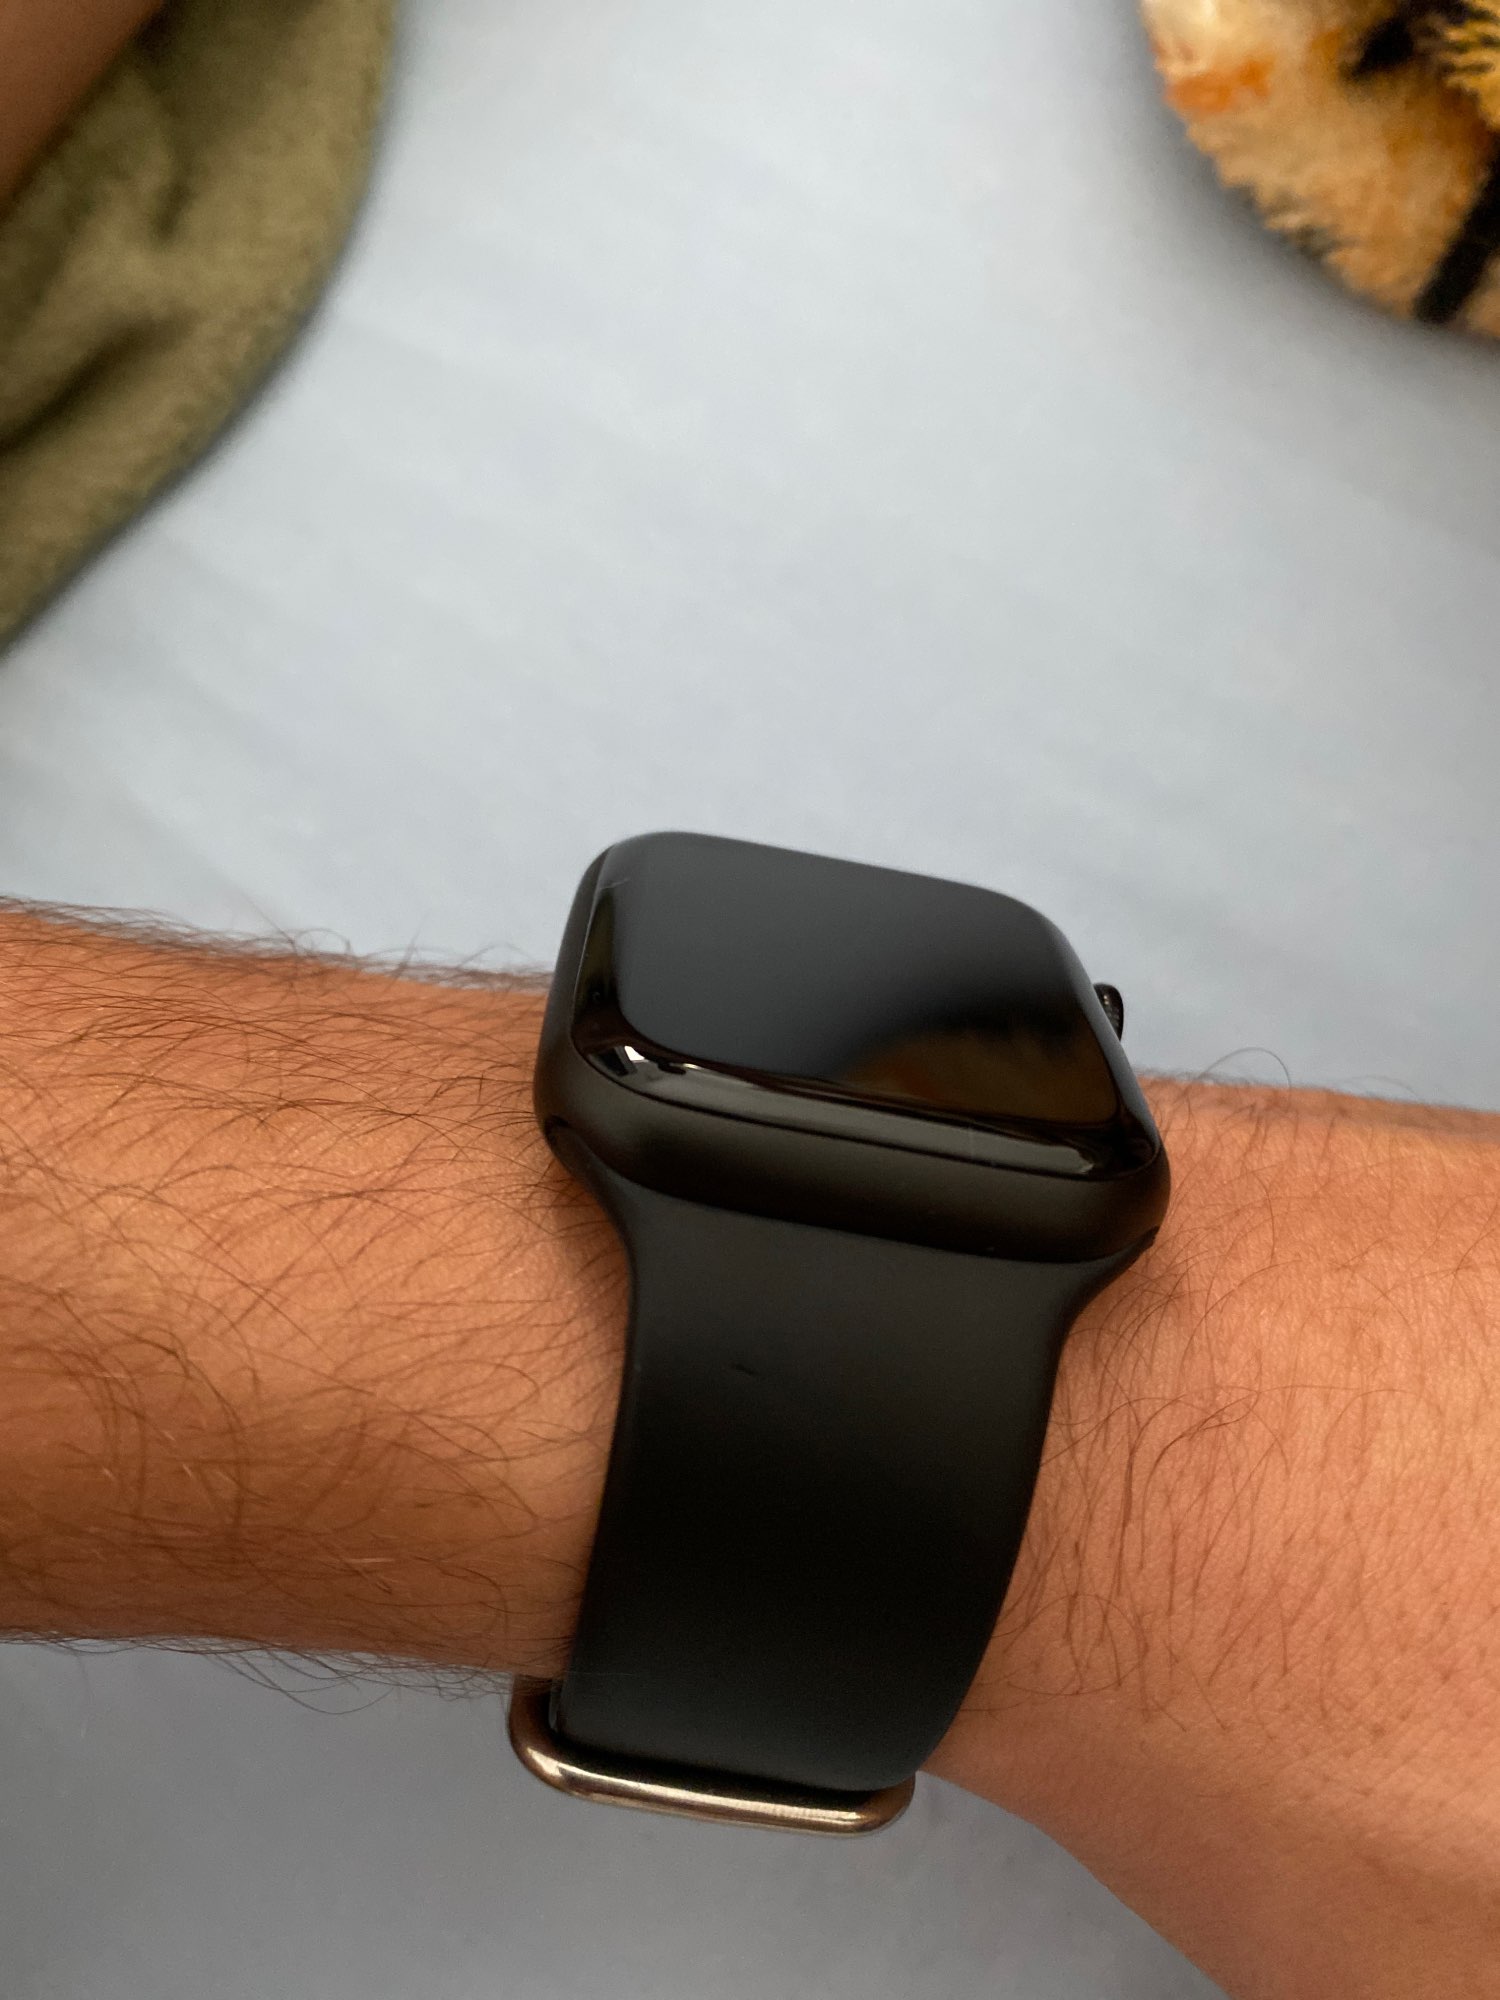 OshenWatch Smart Watch photo review